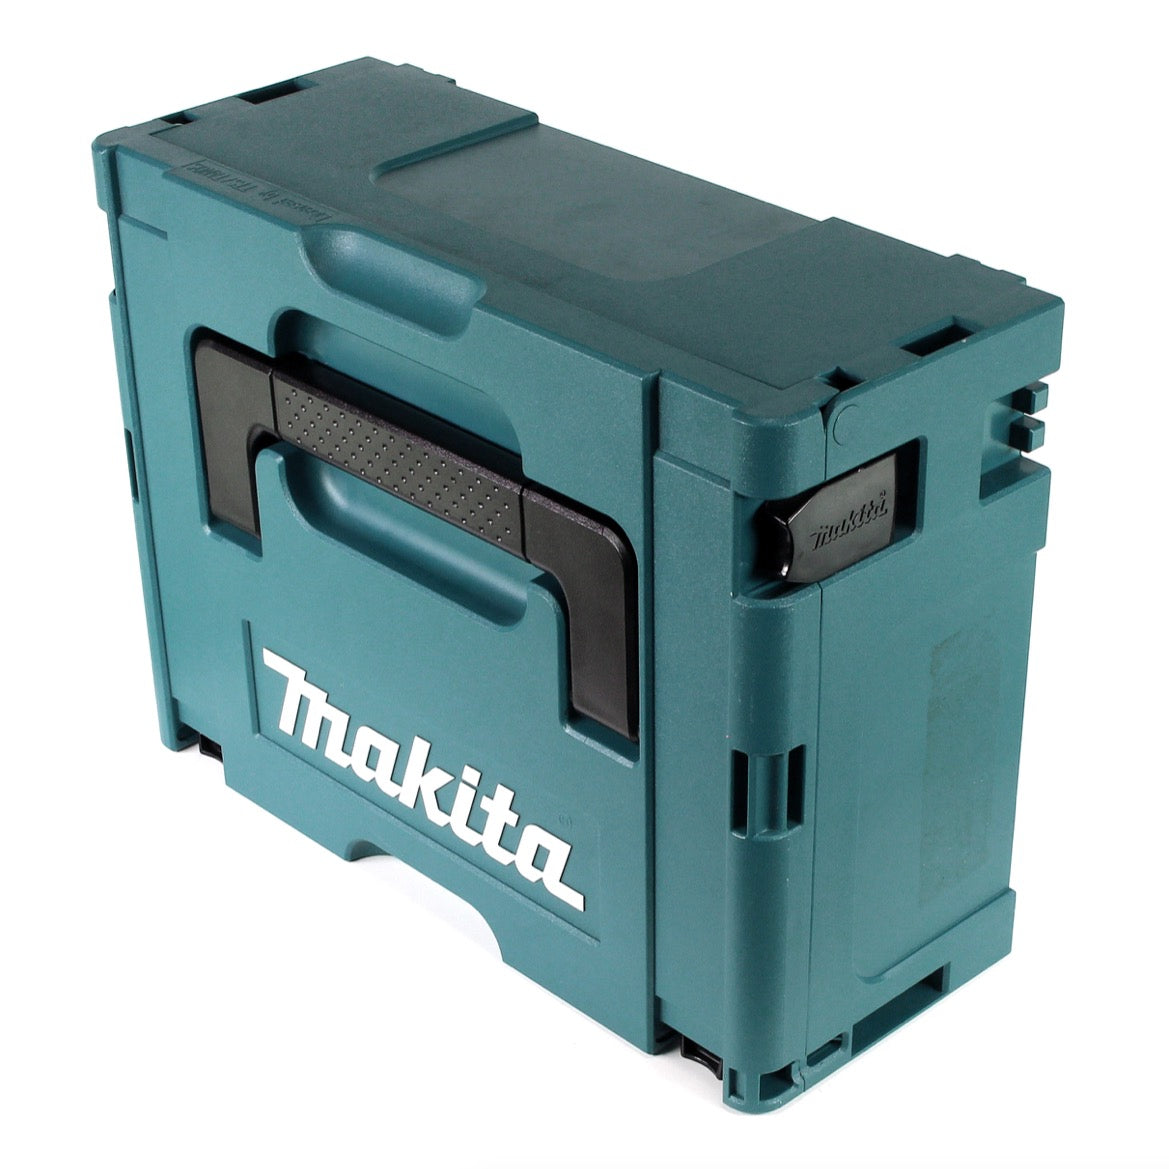 Makita MAKPAC 2 Systemkoffer - ohne Einlage - Toolbrothers